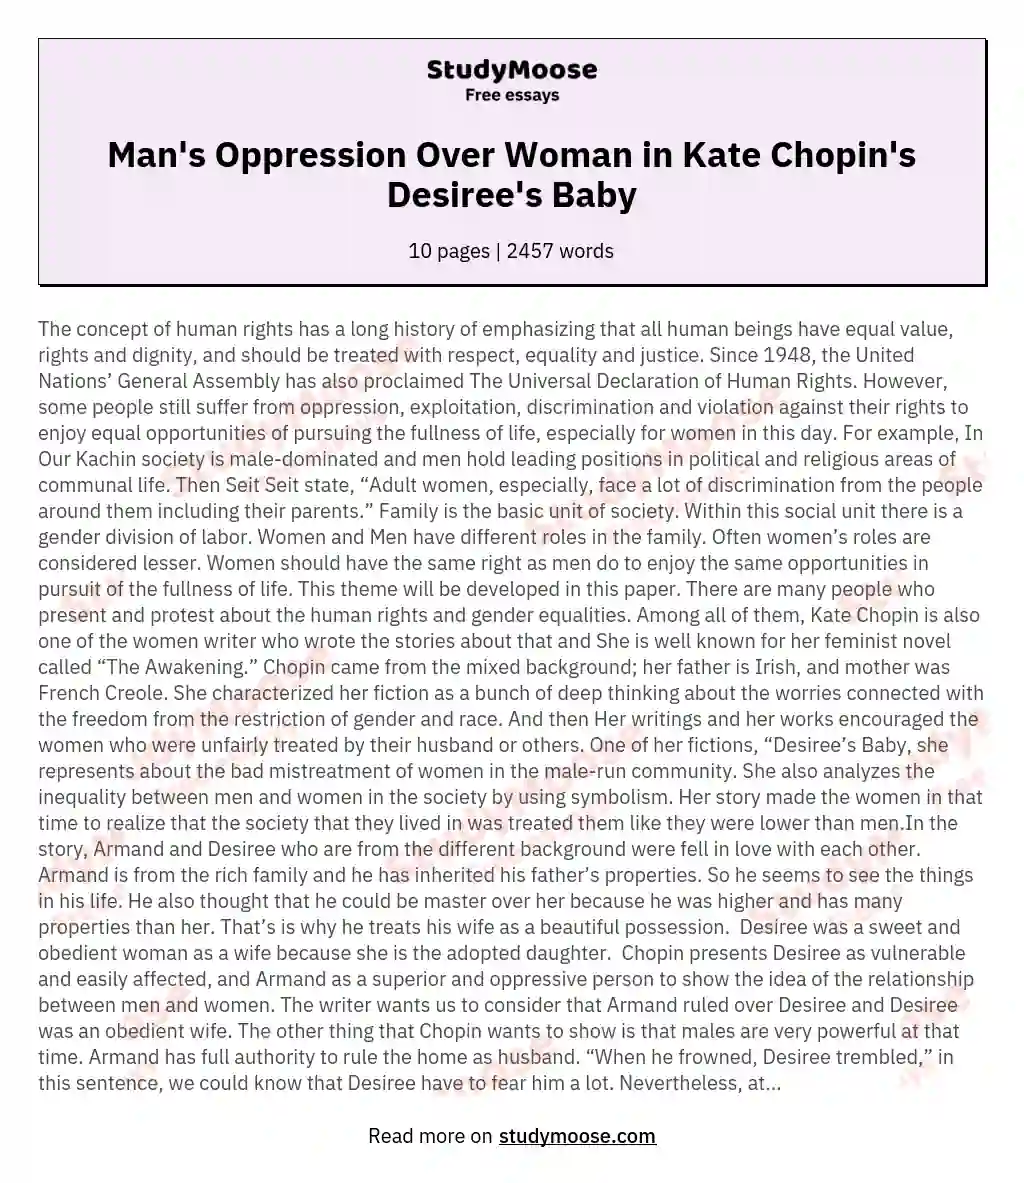 Man's Oppression Over Woman in Kate Chopin's Desiree's Baby essay